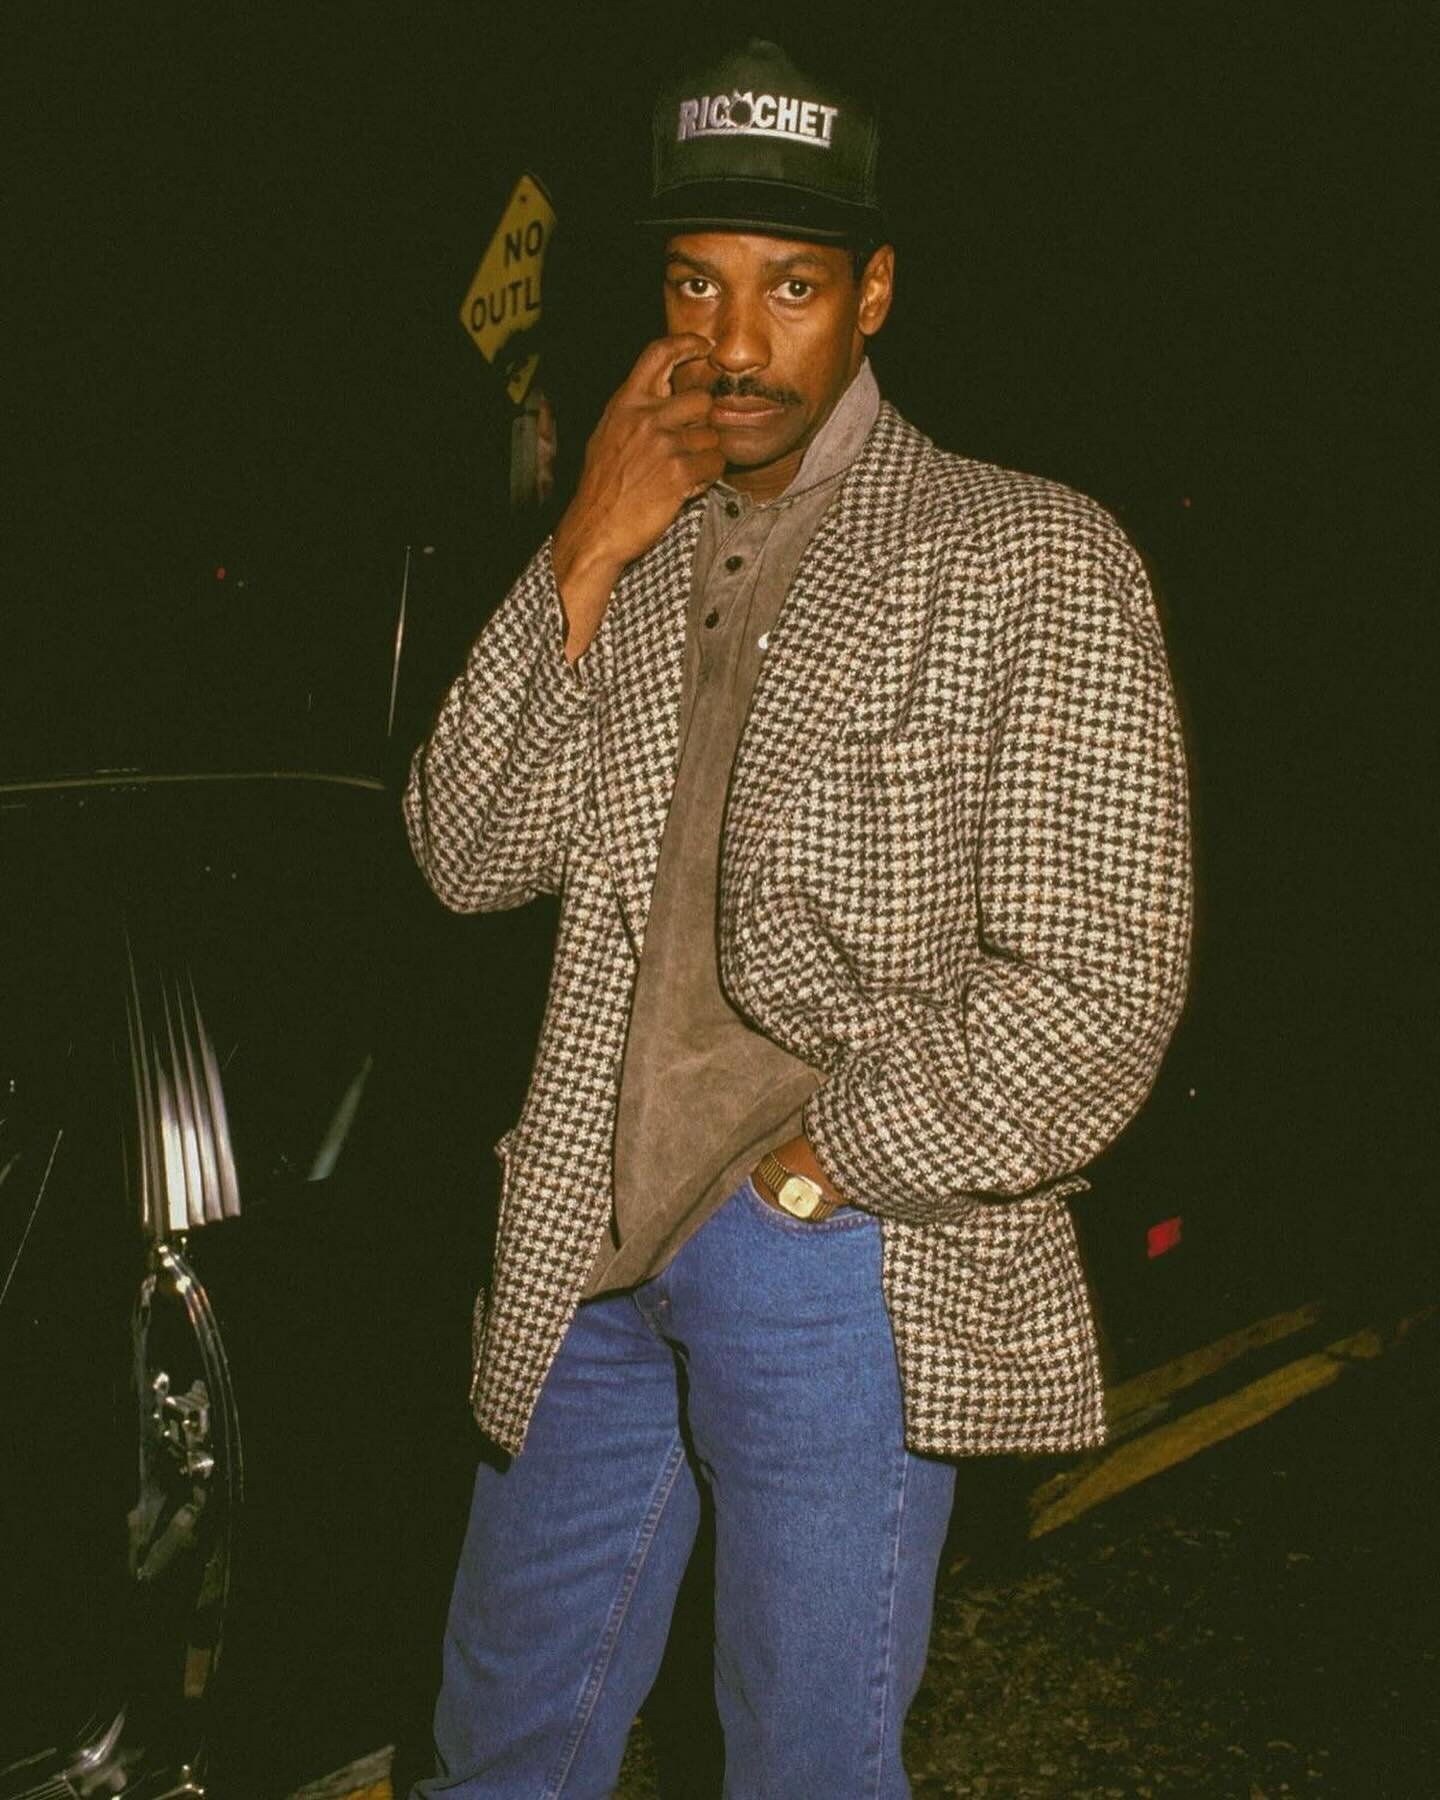 It&rsquo;s a Denzel Washington Wednesday kind of day because why not. 🔥
#thetidalist #dappermen #style #denzel #denzelwashington #vibes #hombres